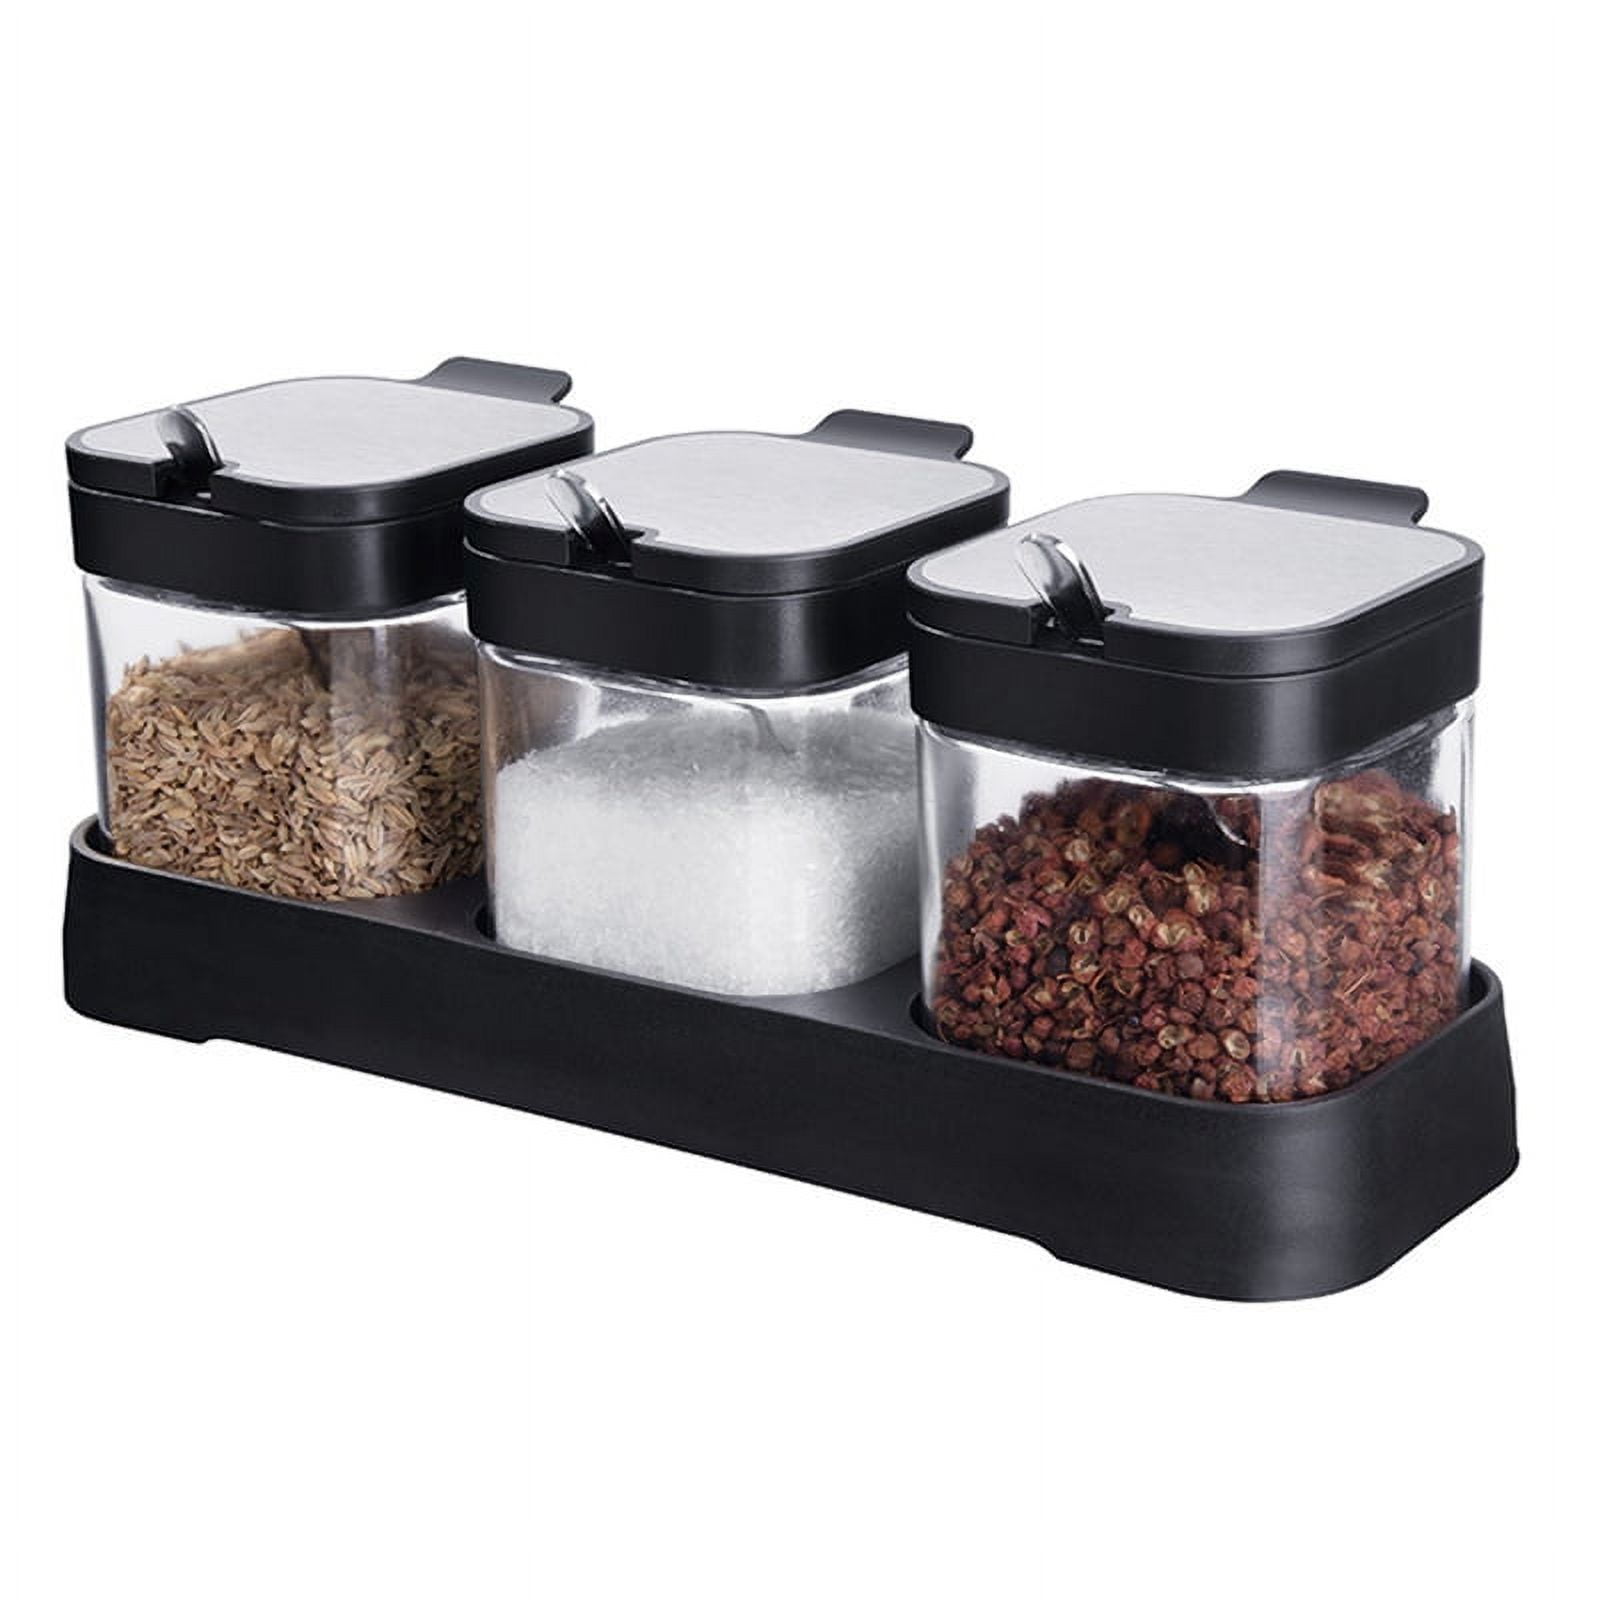 Tibello Spice Containers Glass Spice Jars, 7oz Spice Bottles and Dual Lid Sifter Shaker and Spoon Opening Spice Shaker - Pack of 2